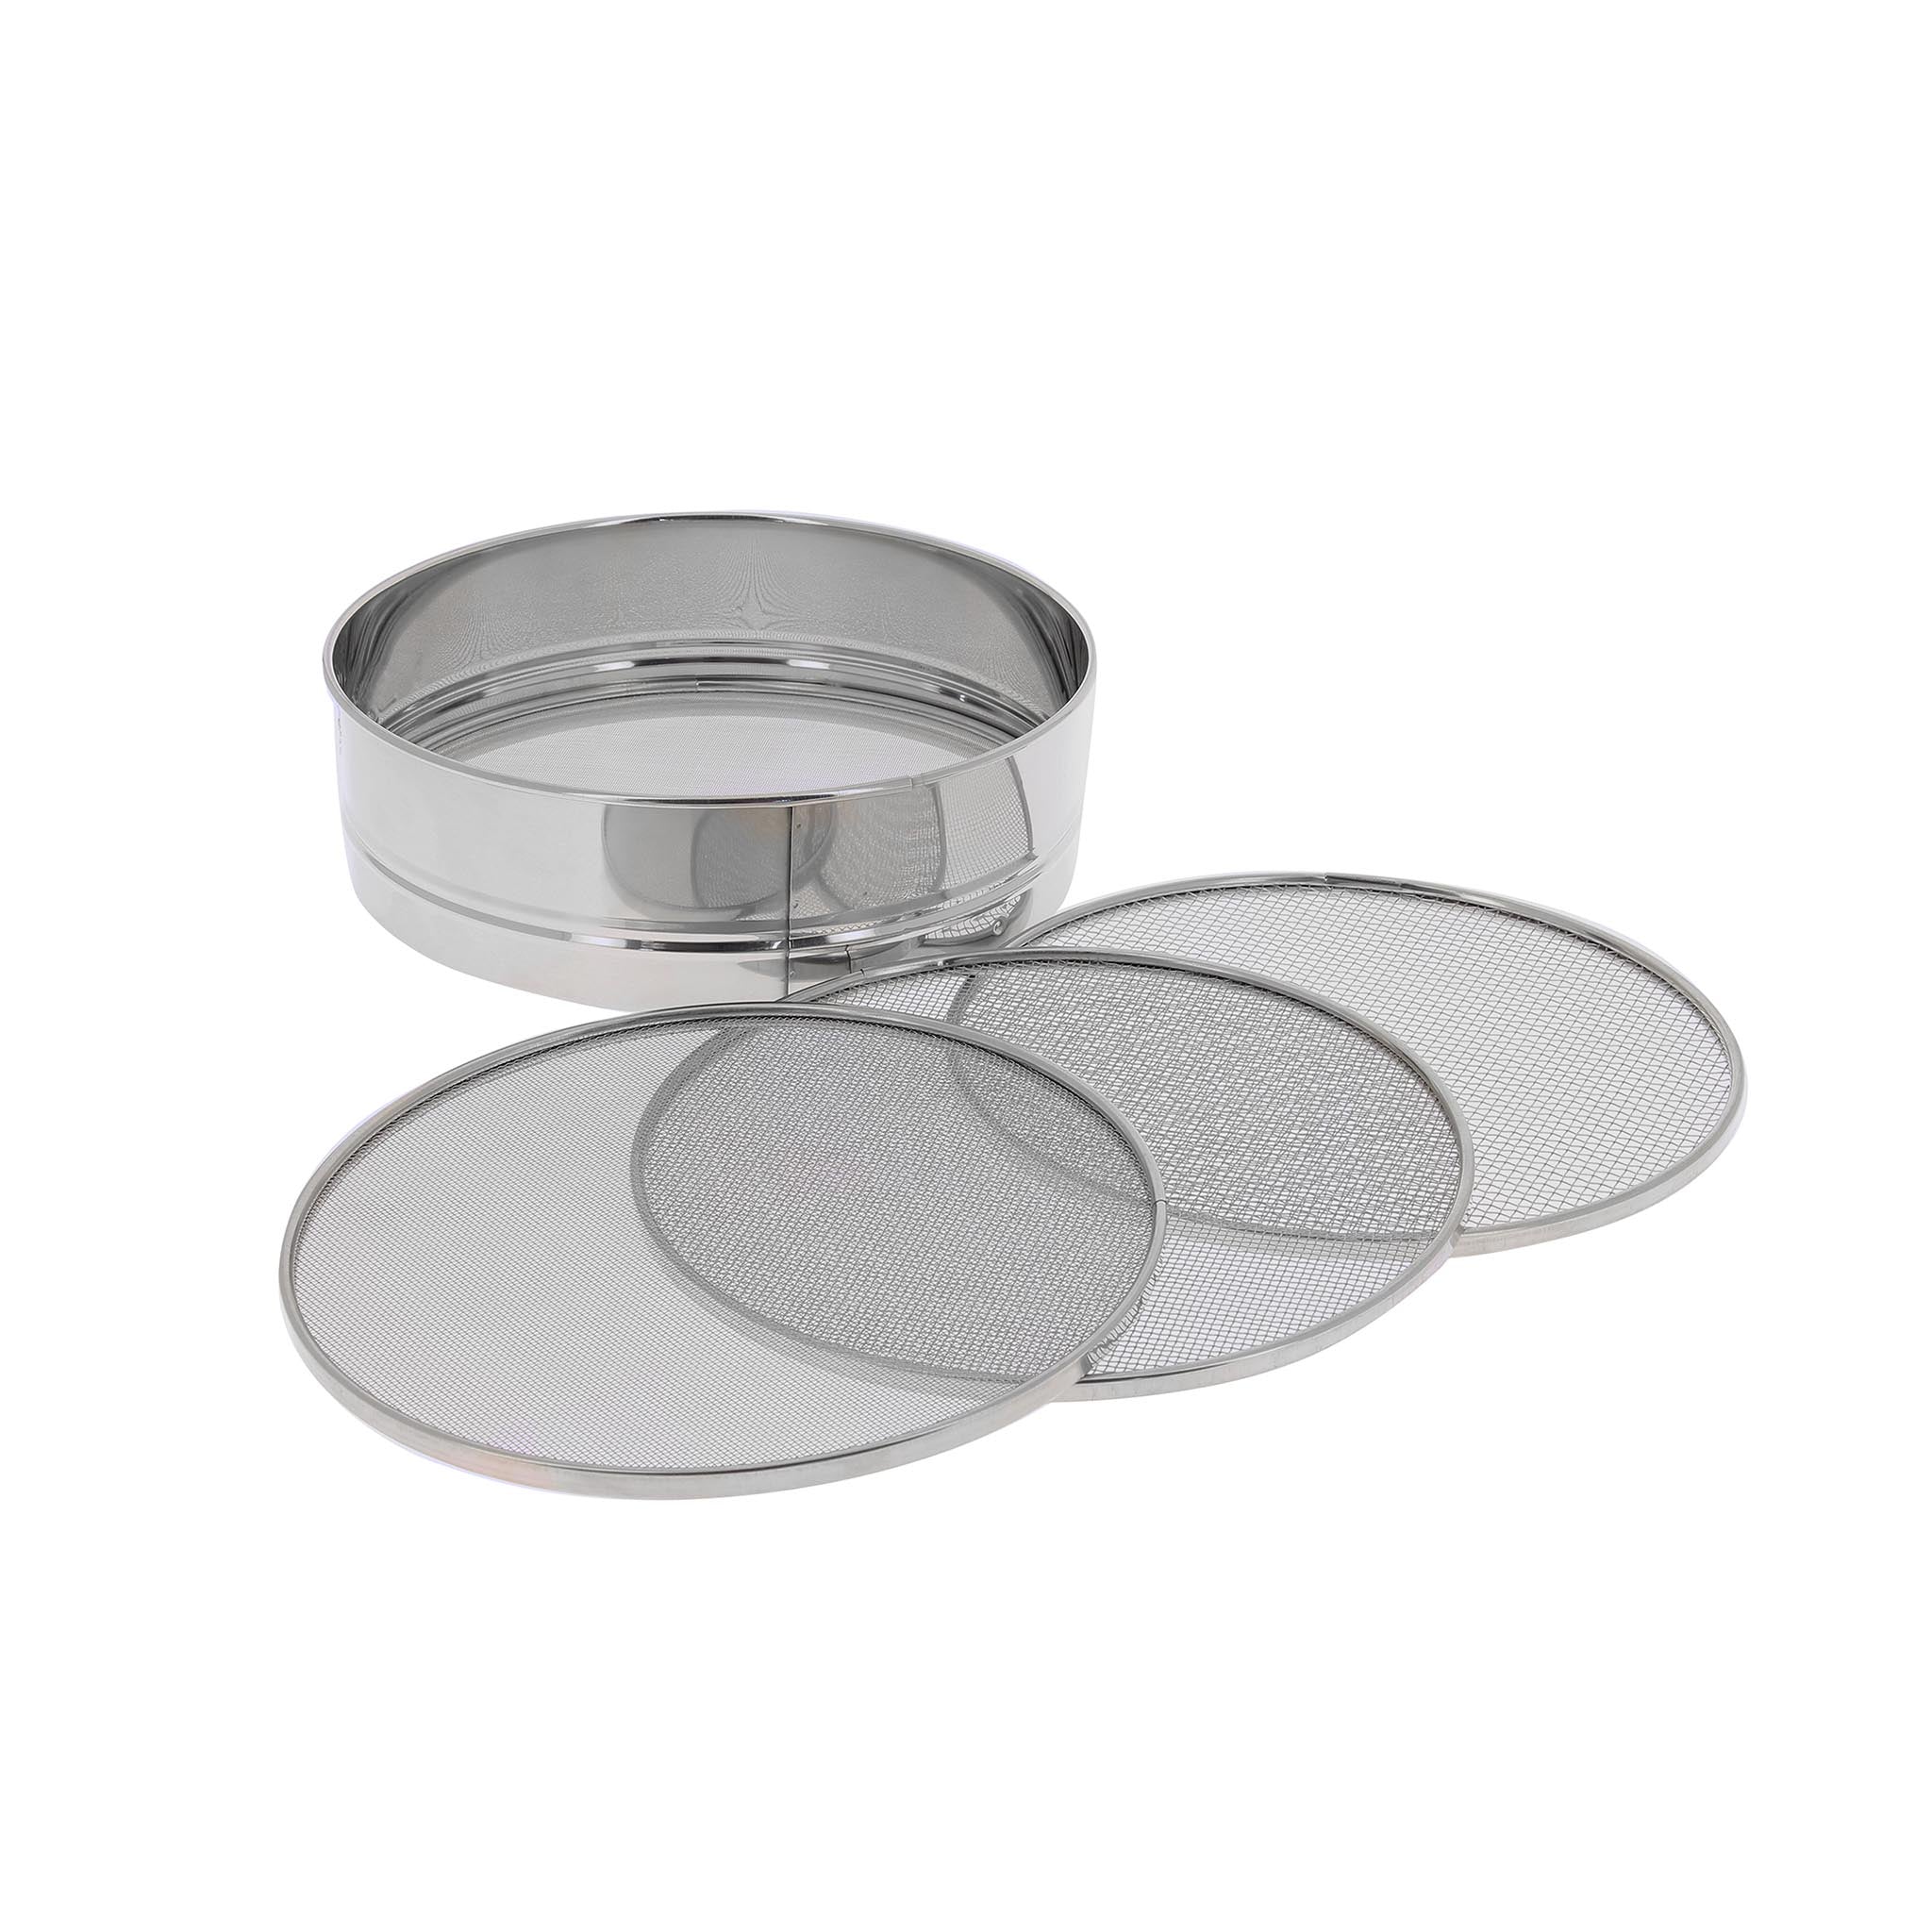 De Buyer Stainless Steel Sieve with Interchangeable Mesh Cookware Bakeware & Roasting French Food